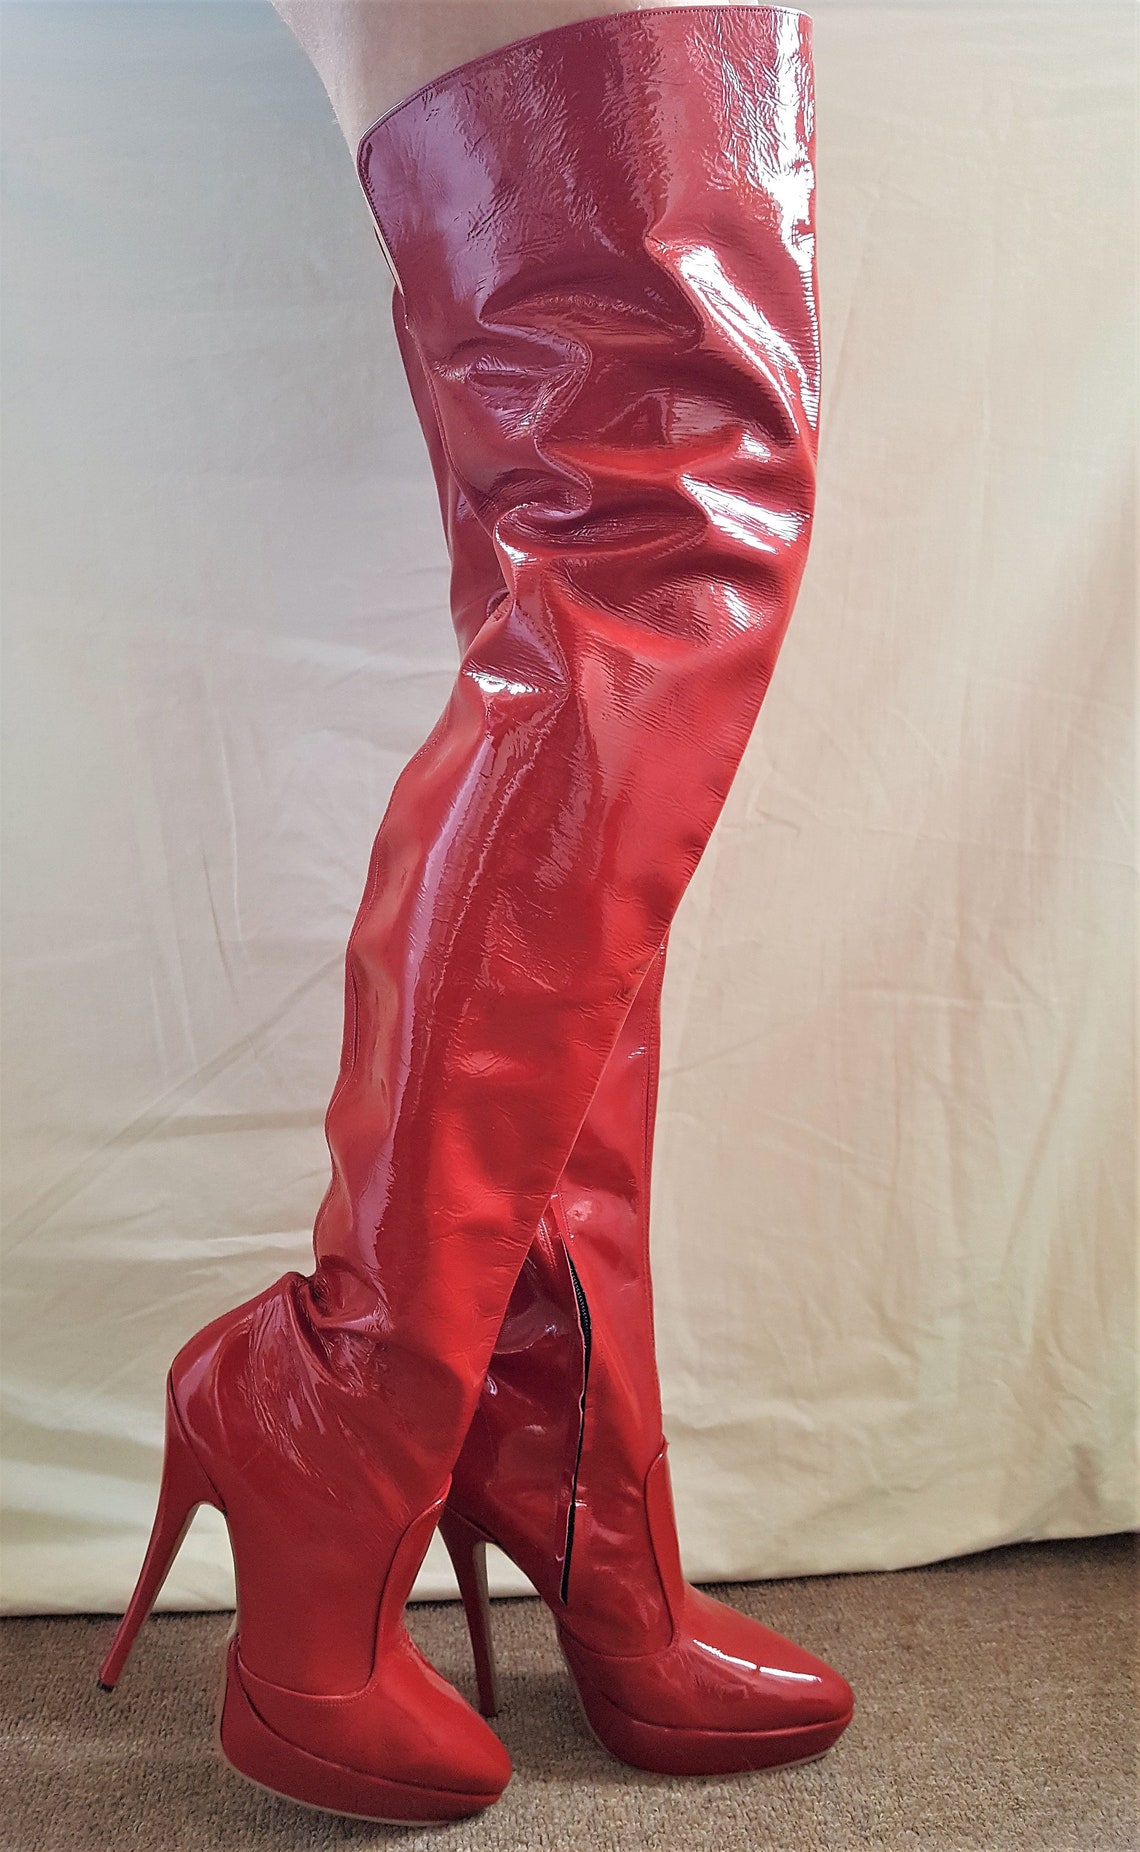 Platform Thigh Length Boots Red Patent Leather Size UK 10 EU | Etsy